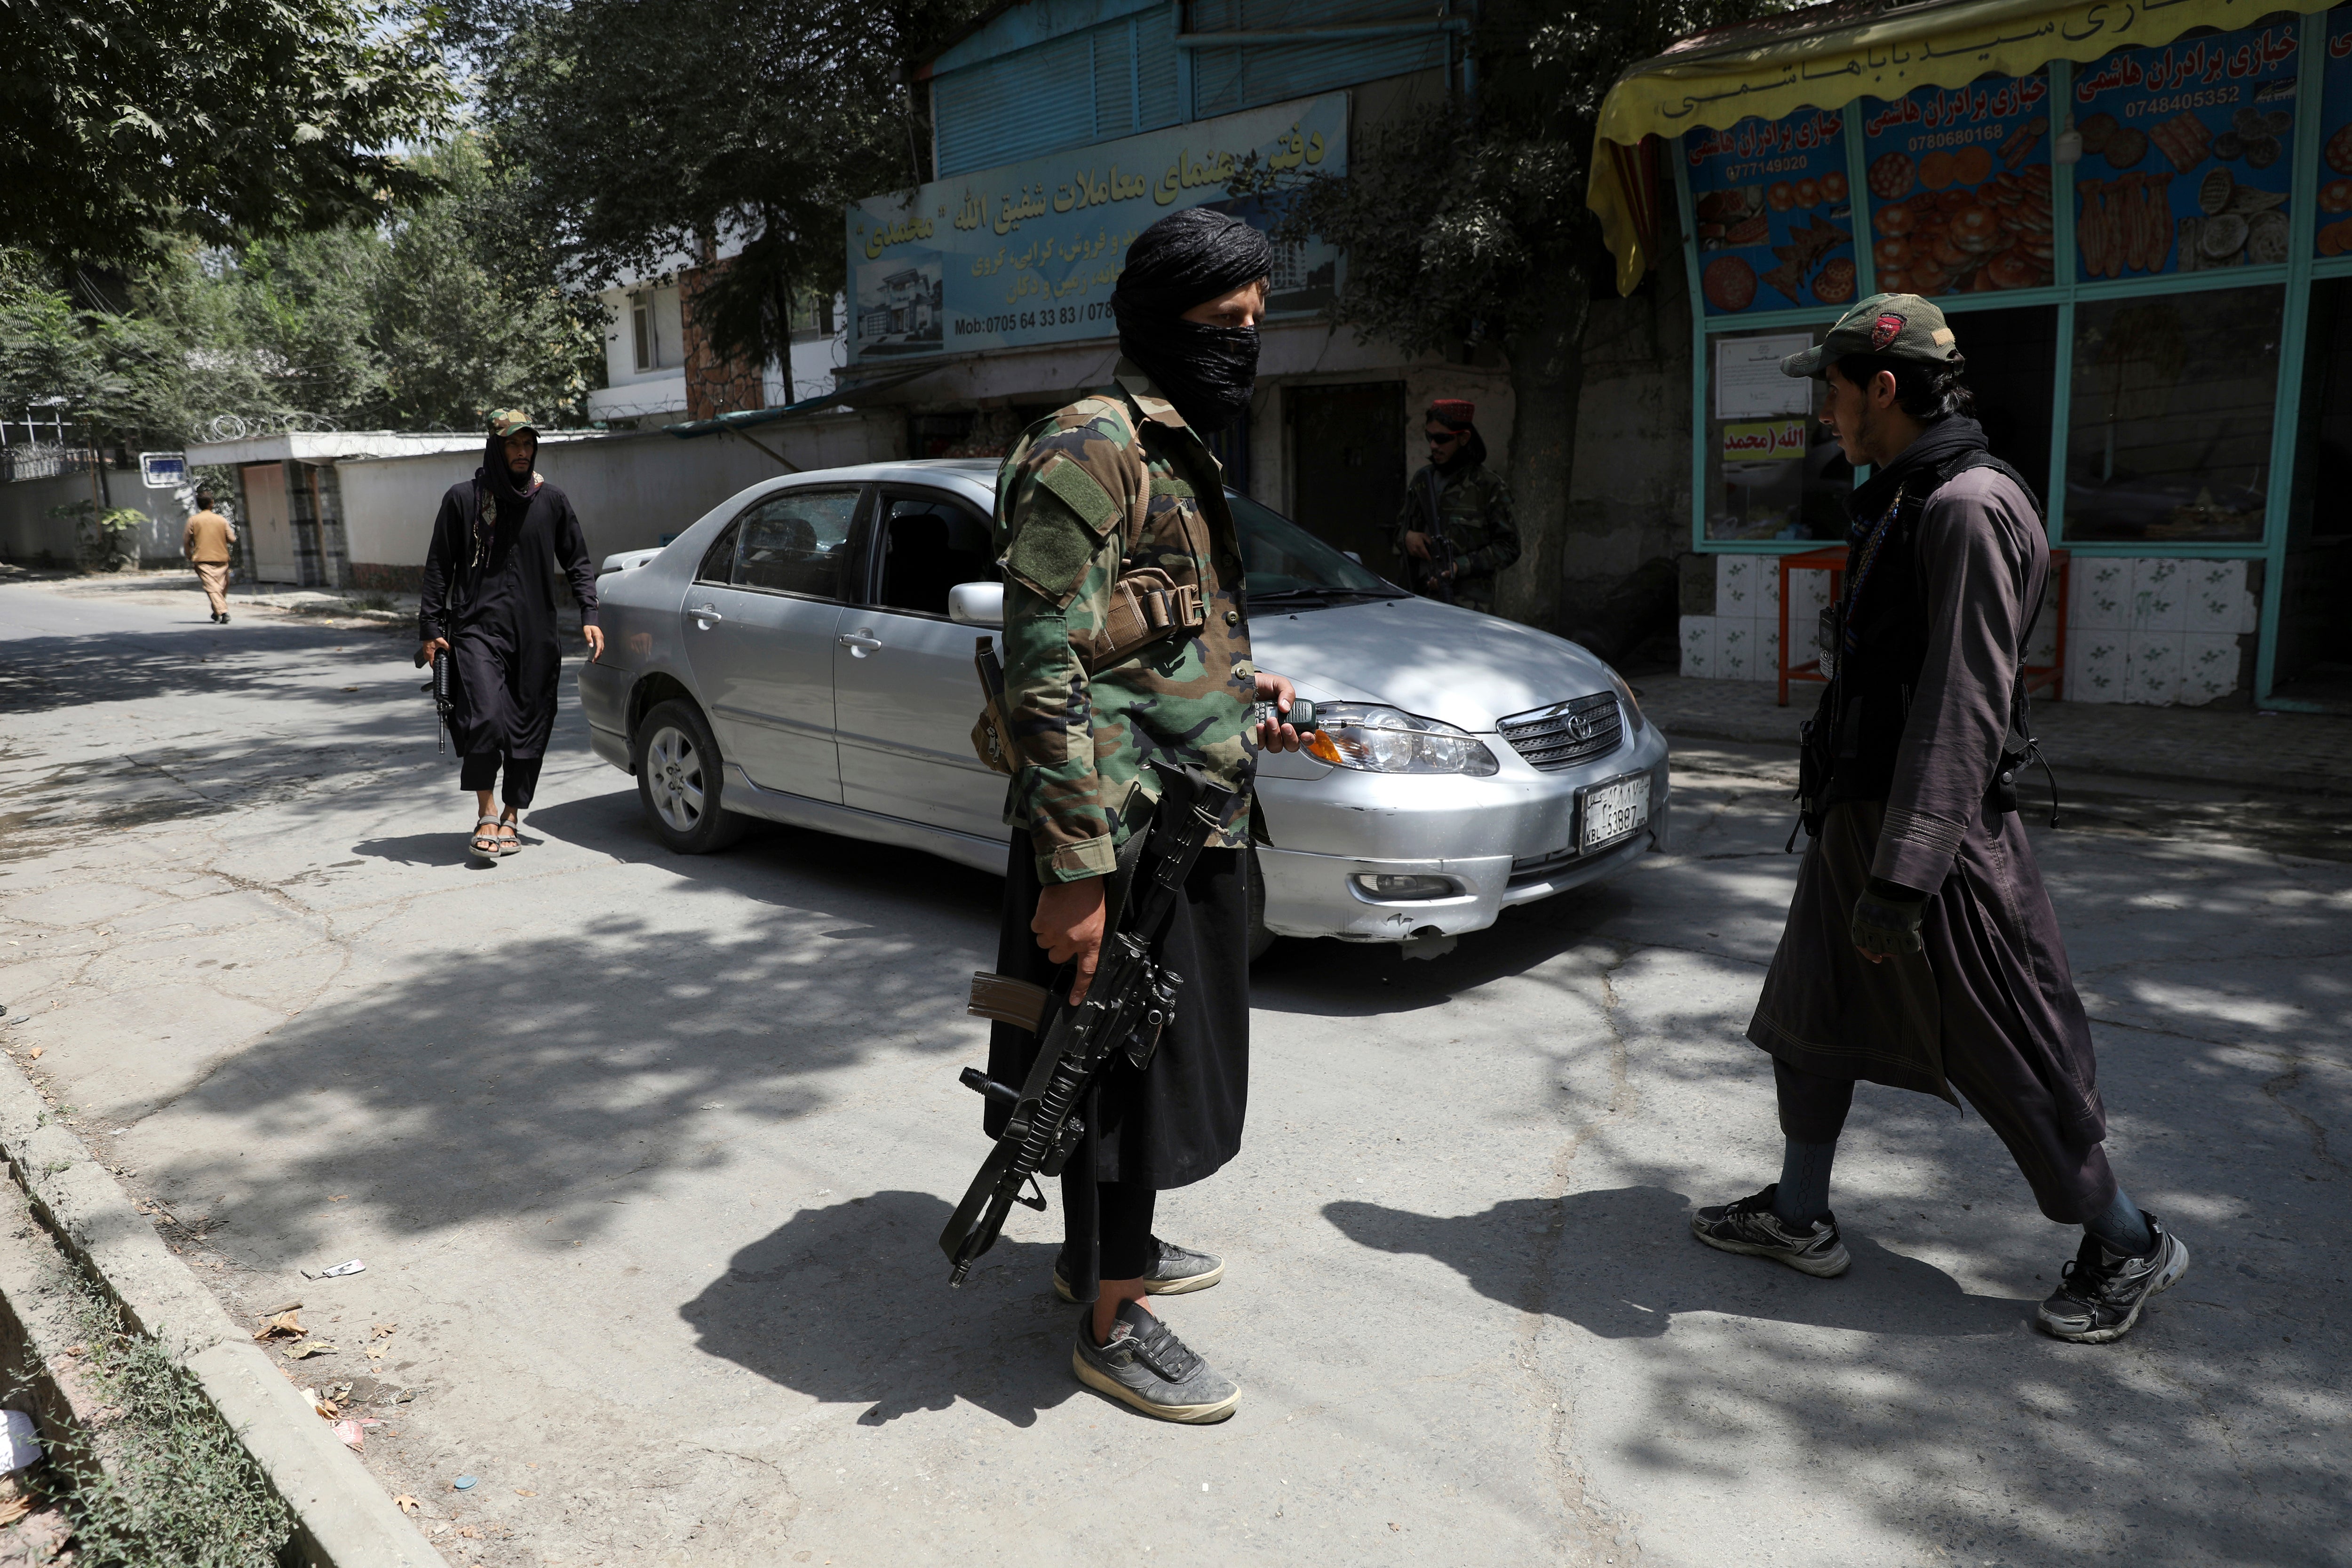 Taliban fighters stand guard at a checkpoint in the Wazir Akbar Khan neighborhood in Kabul